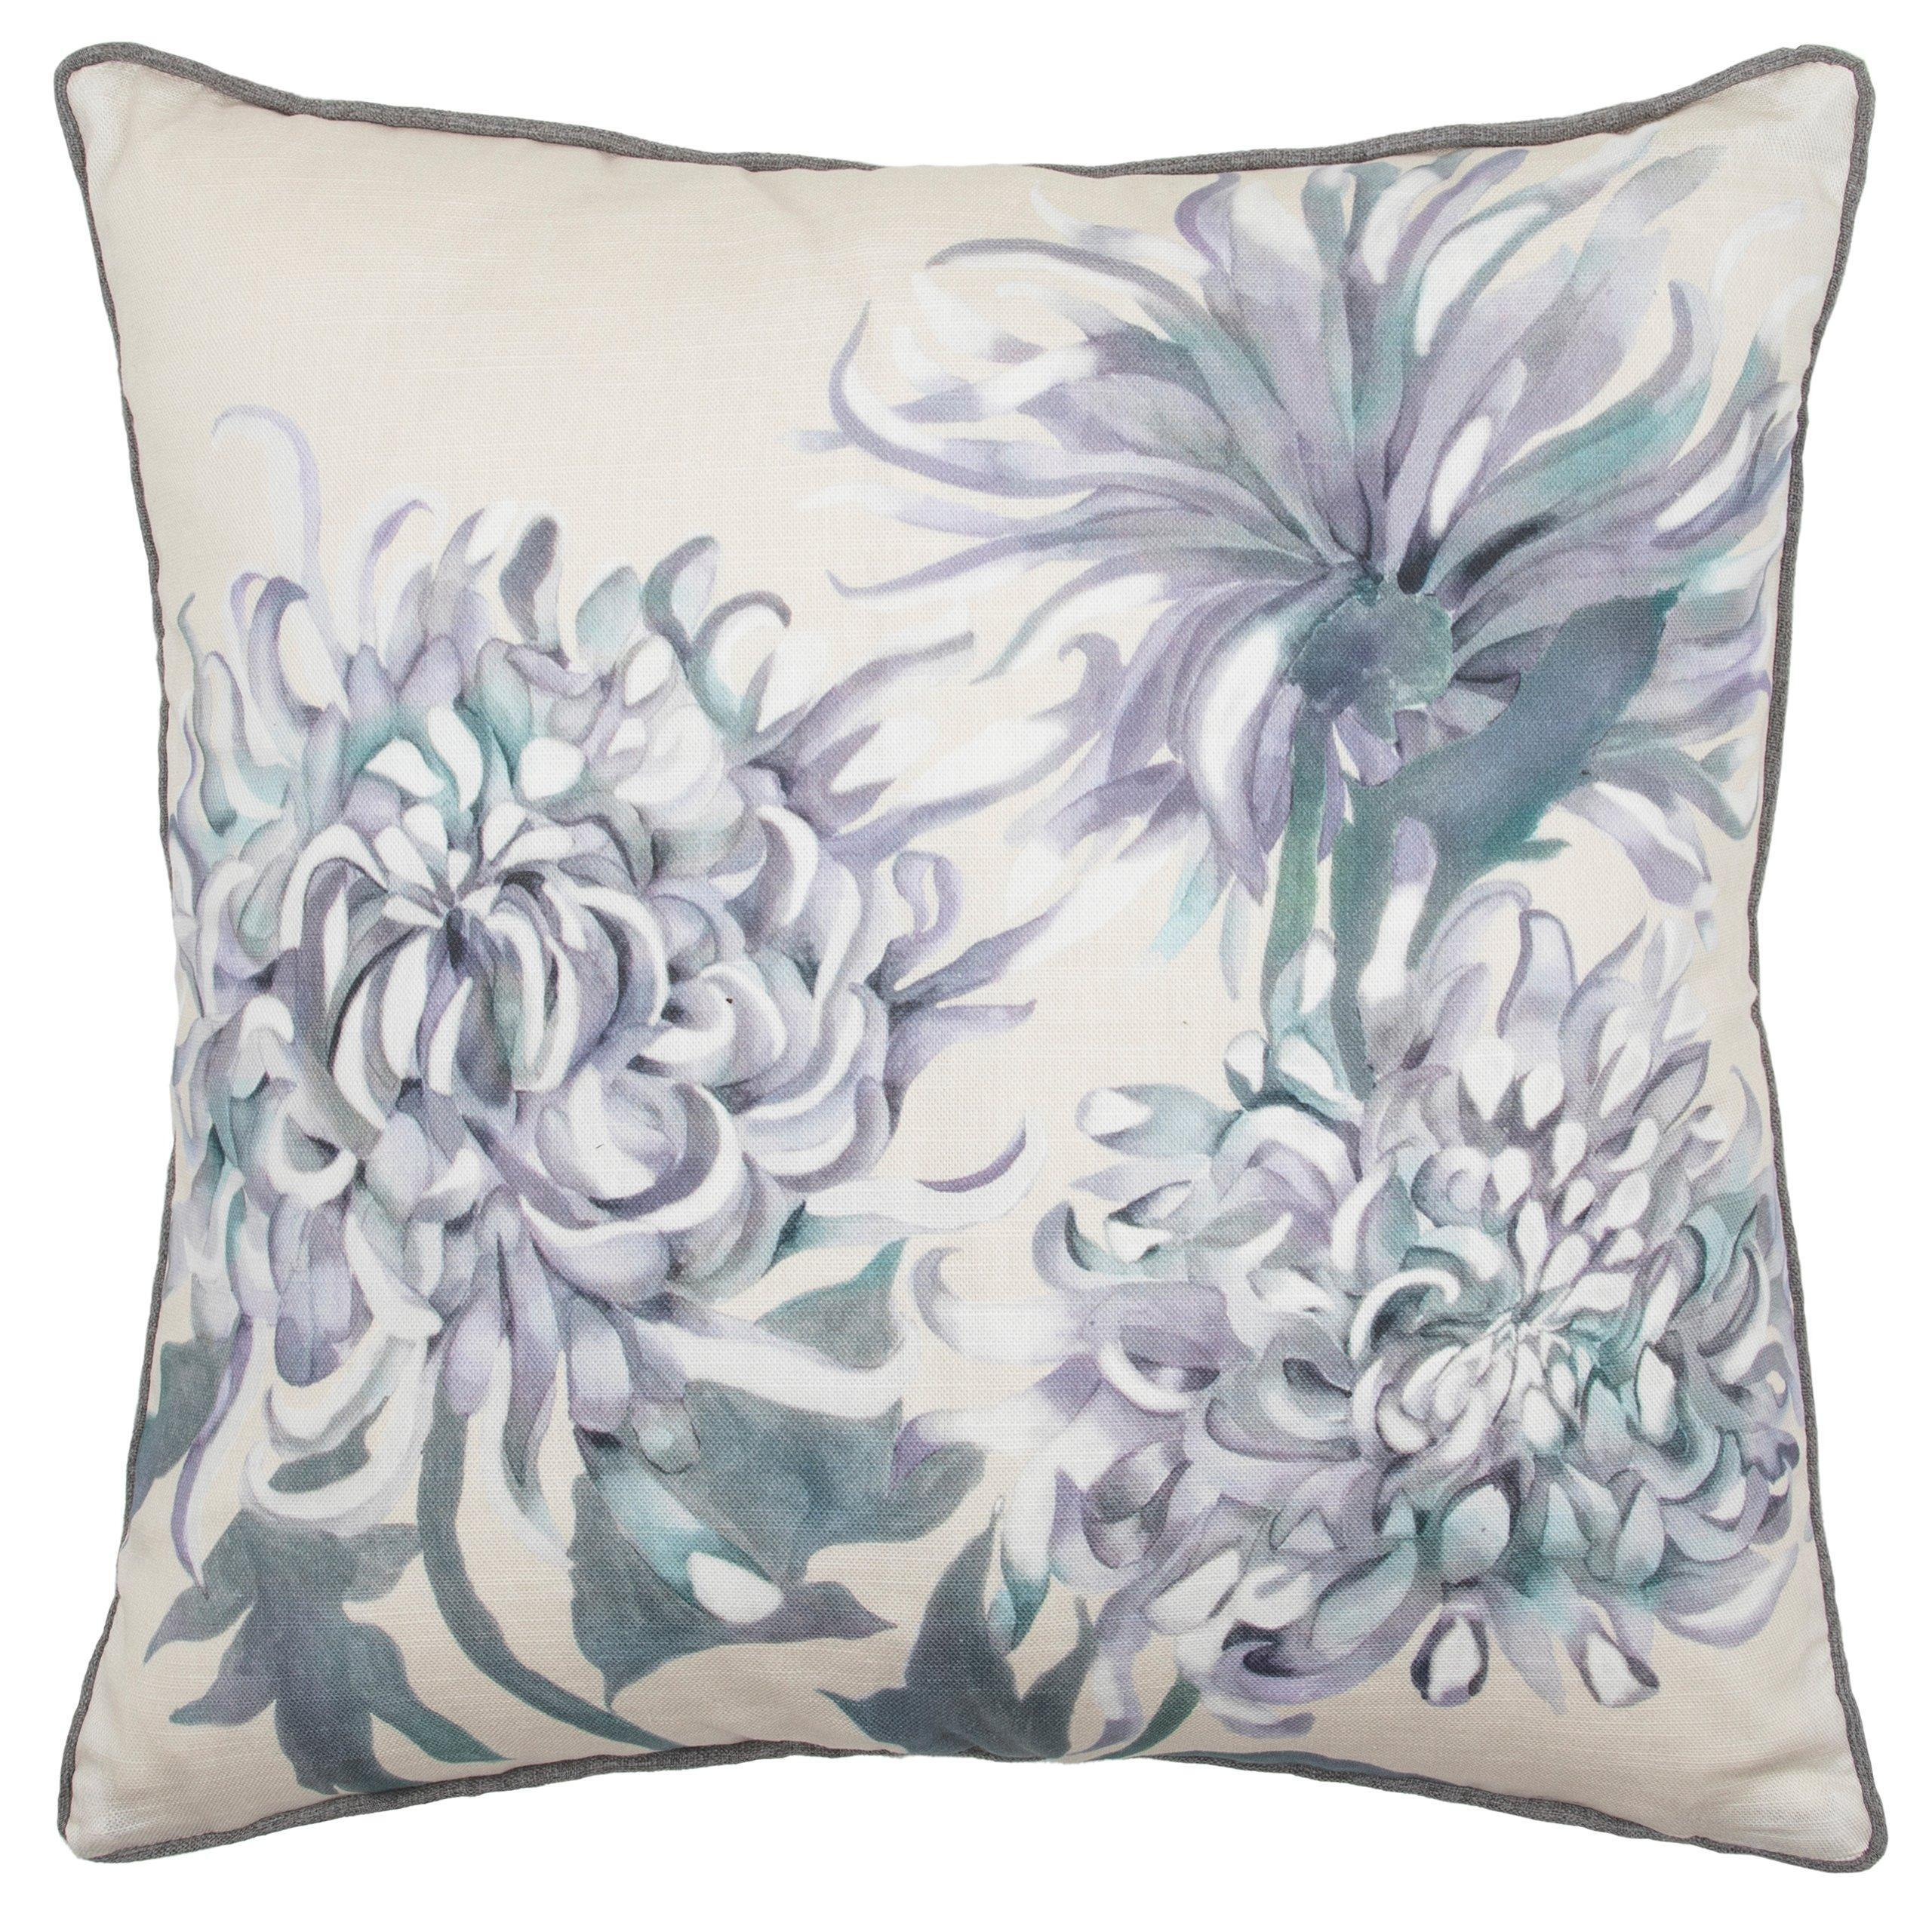 Belladonna Floral Piped Cushion - image 1